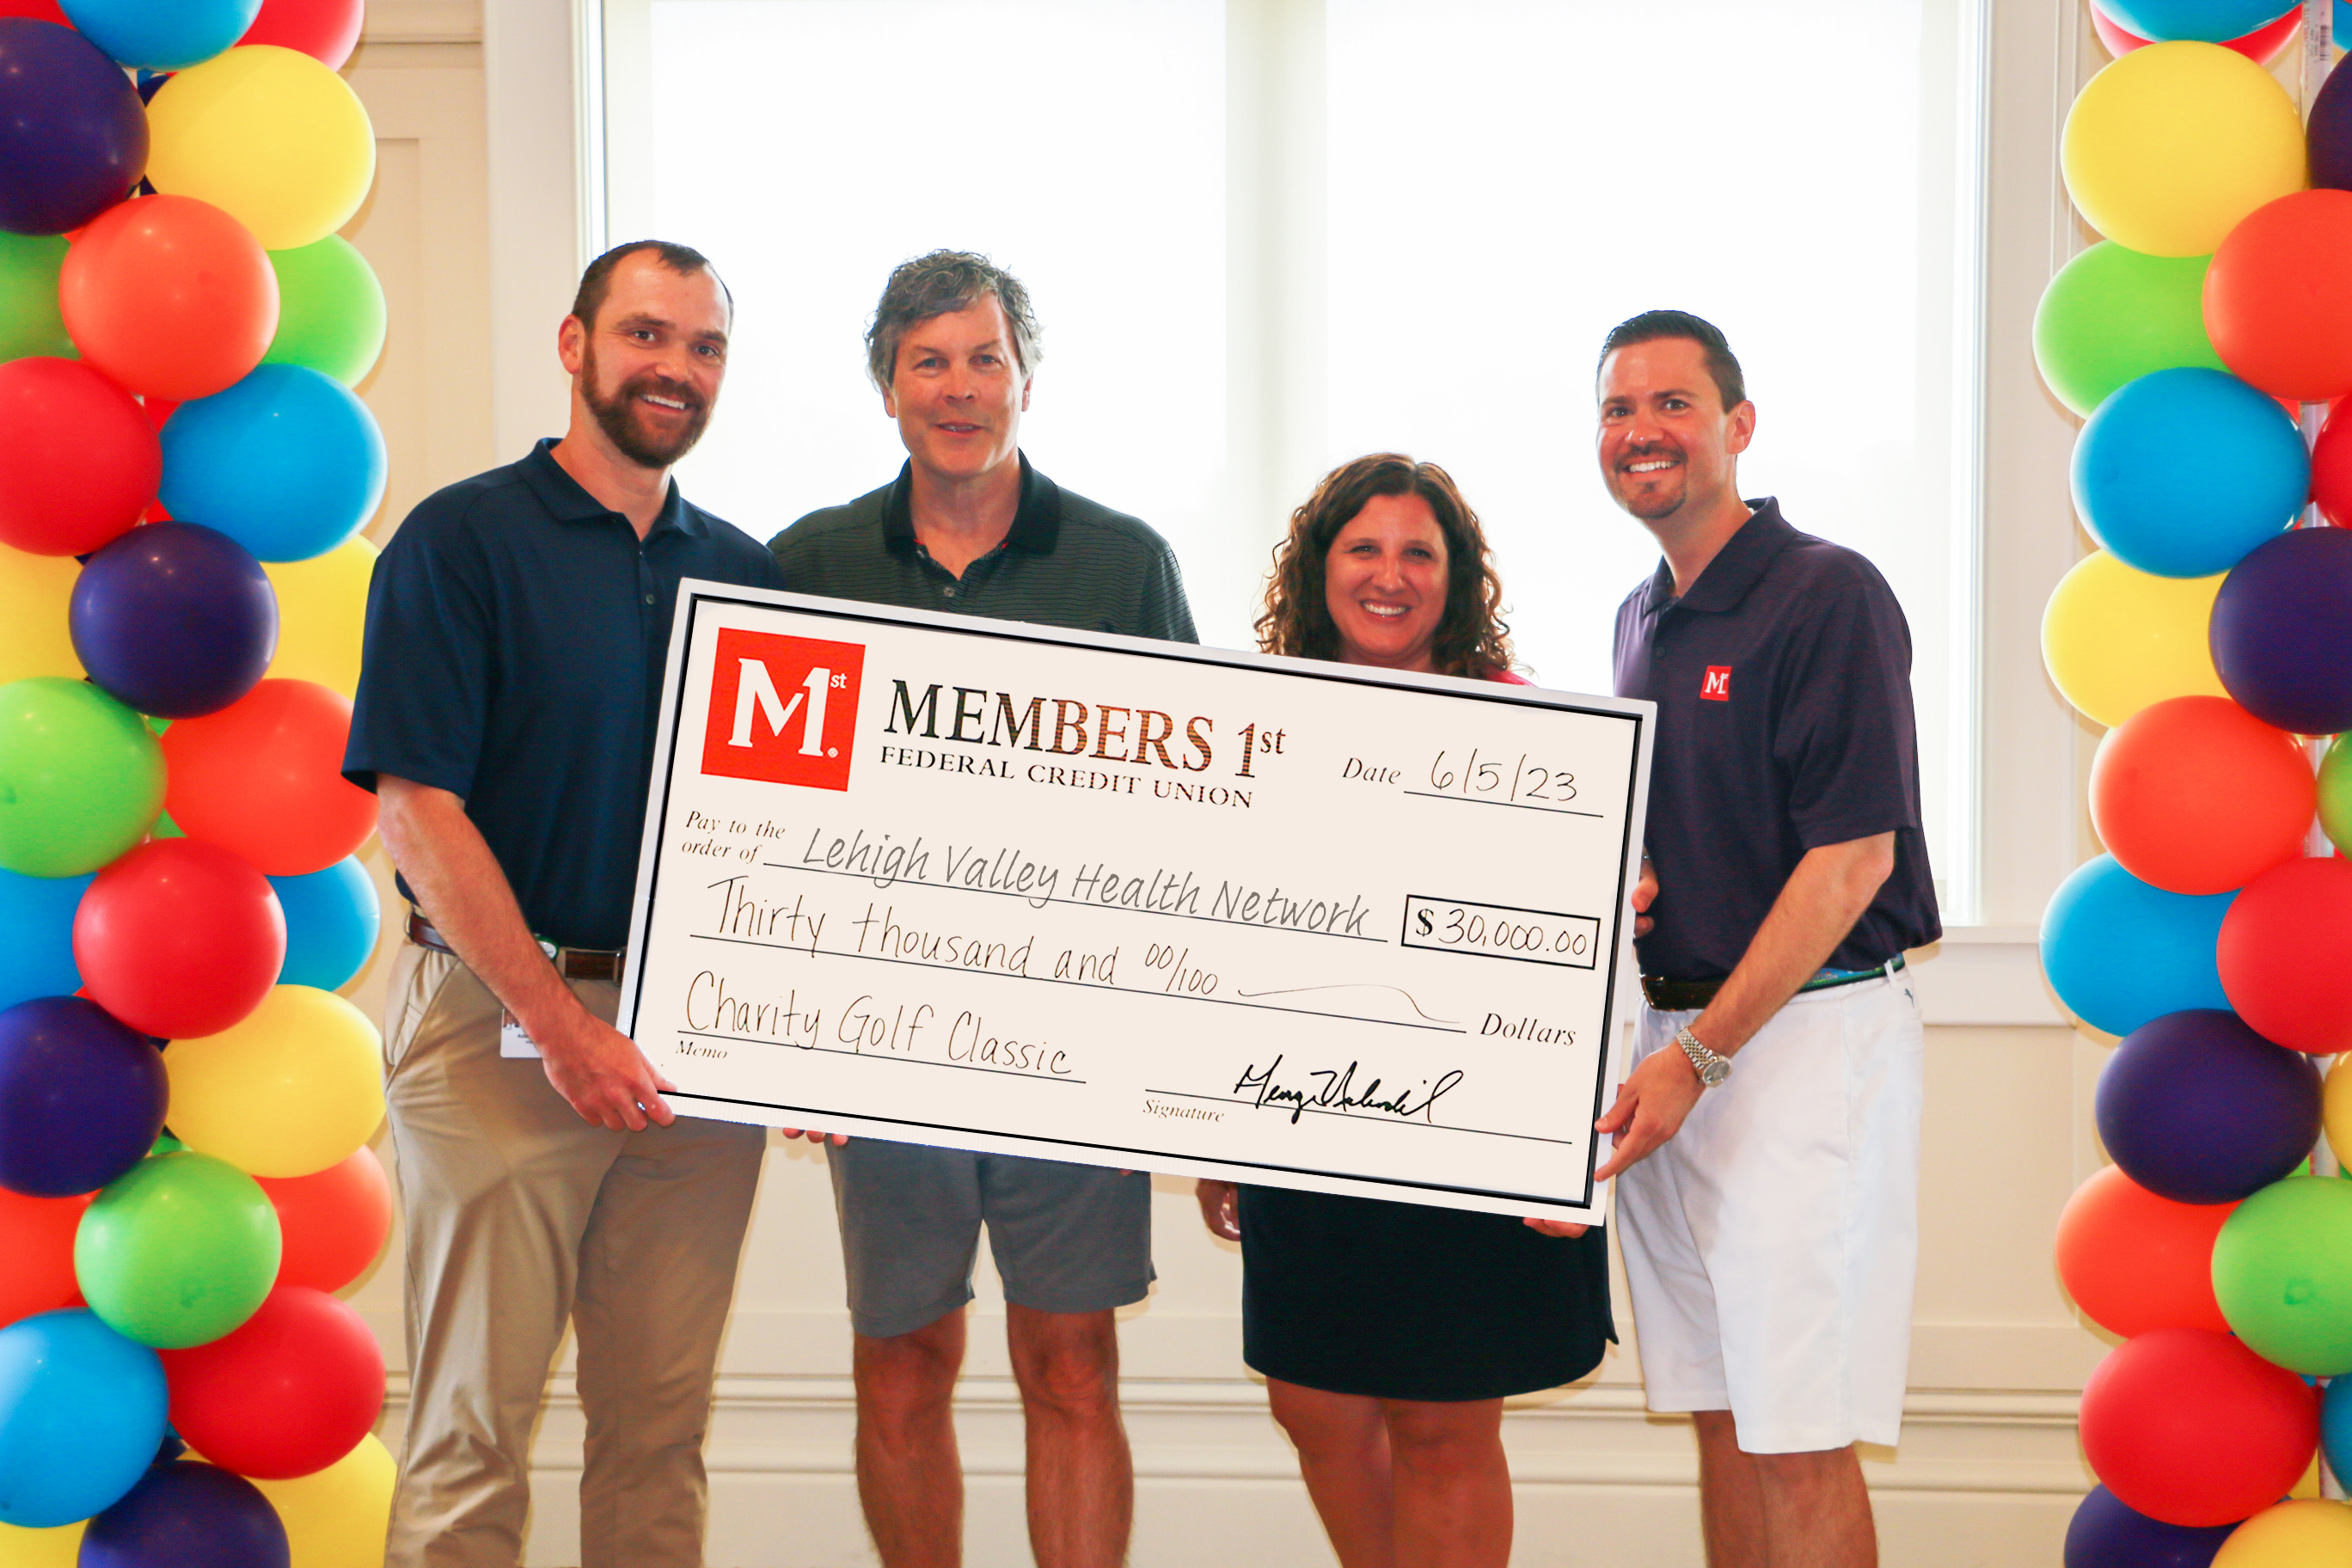 Members 1st Donates to Lehigh Valley Health Network